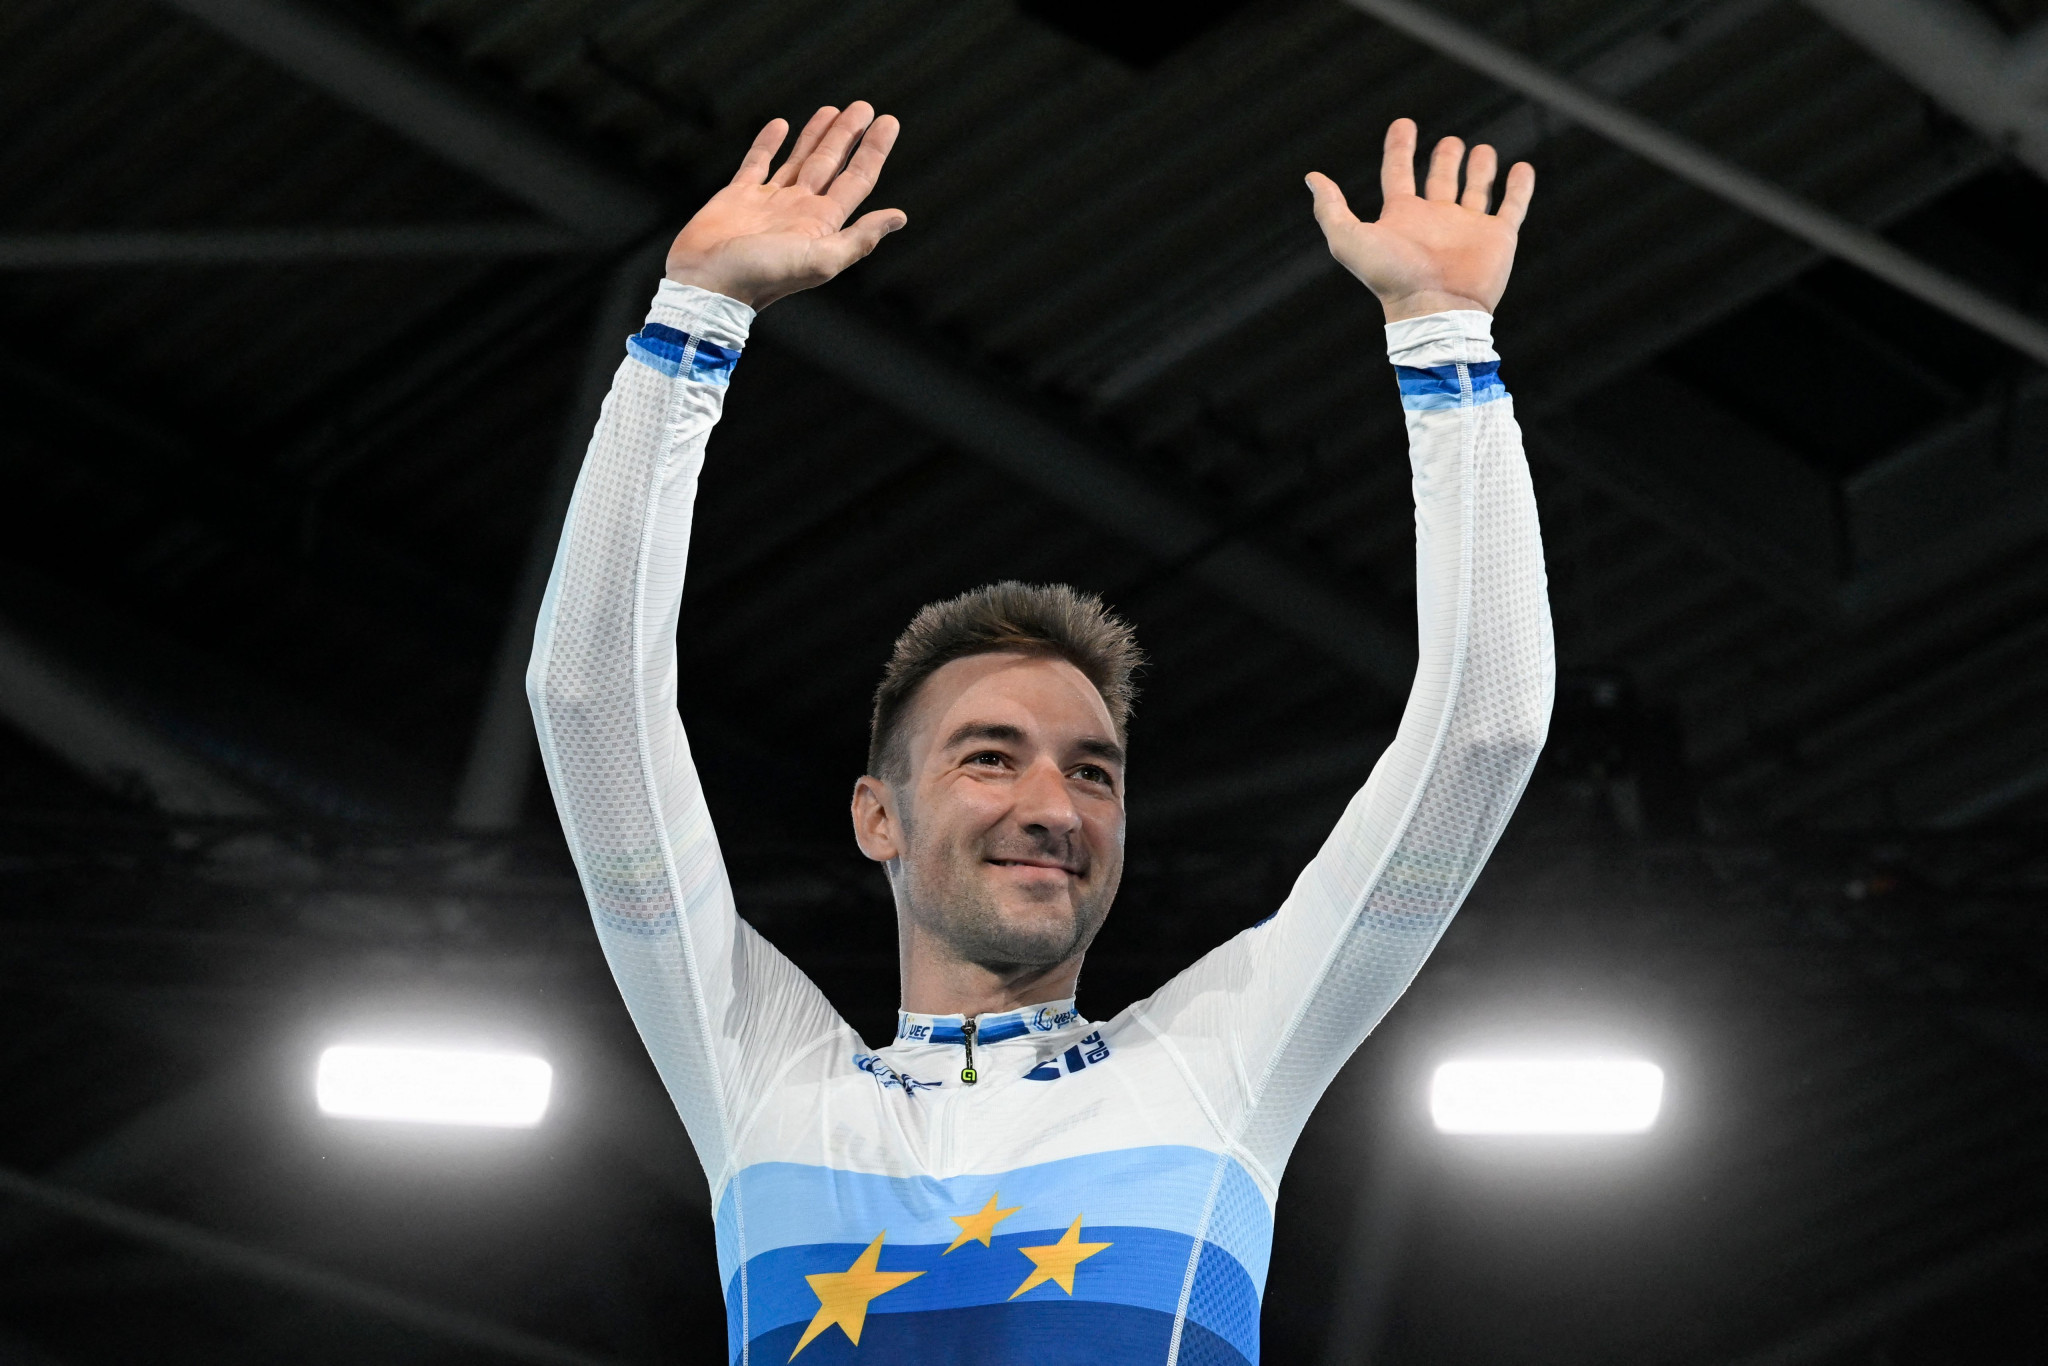 Elia Viviani won the elimination race on a busy day for the Italians ©Getty Images